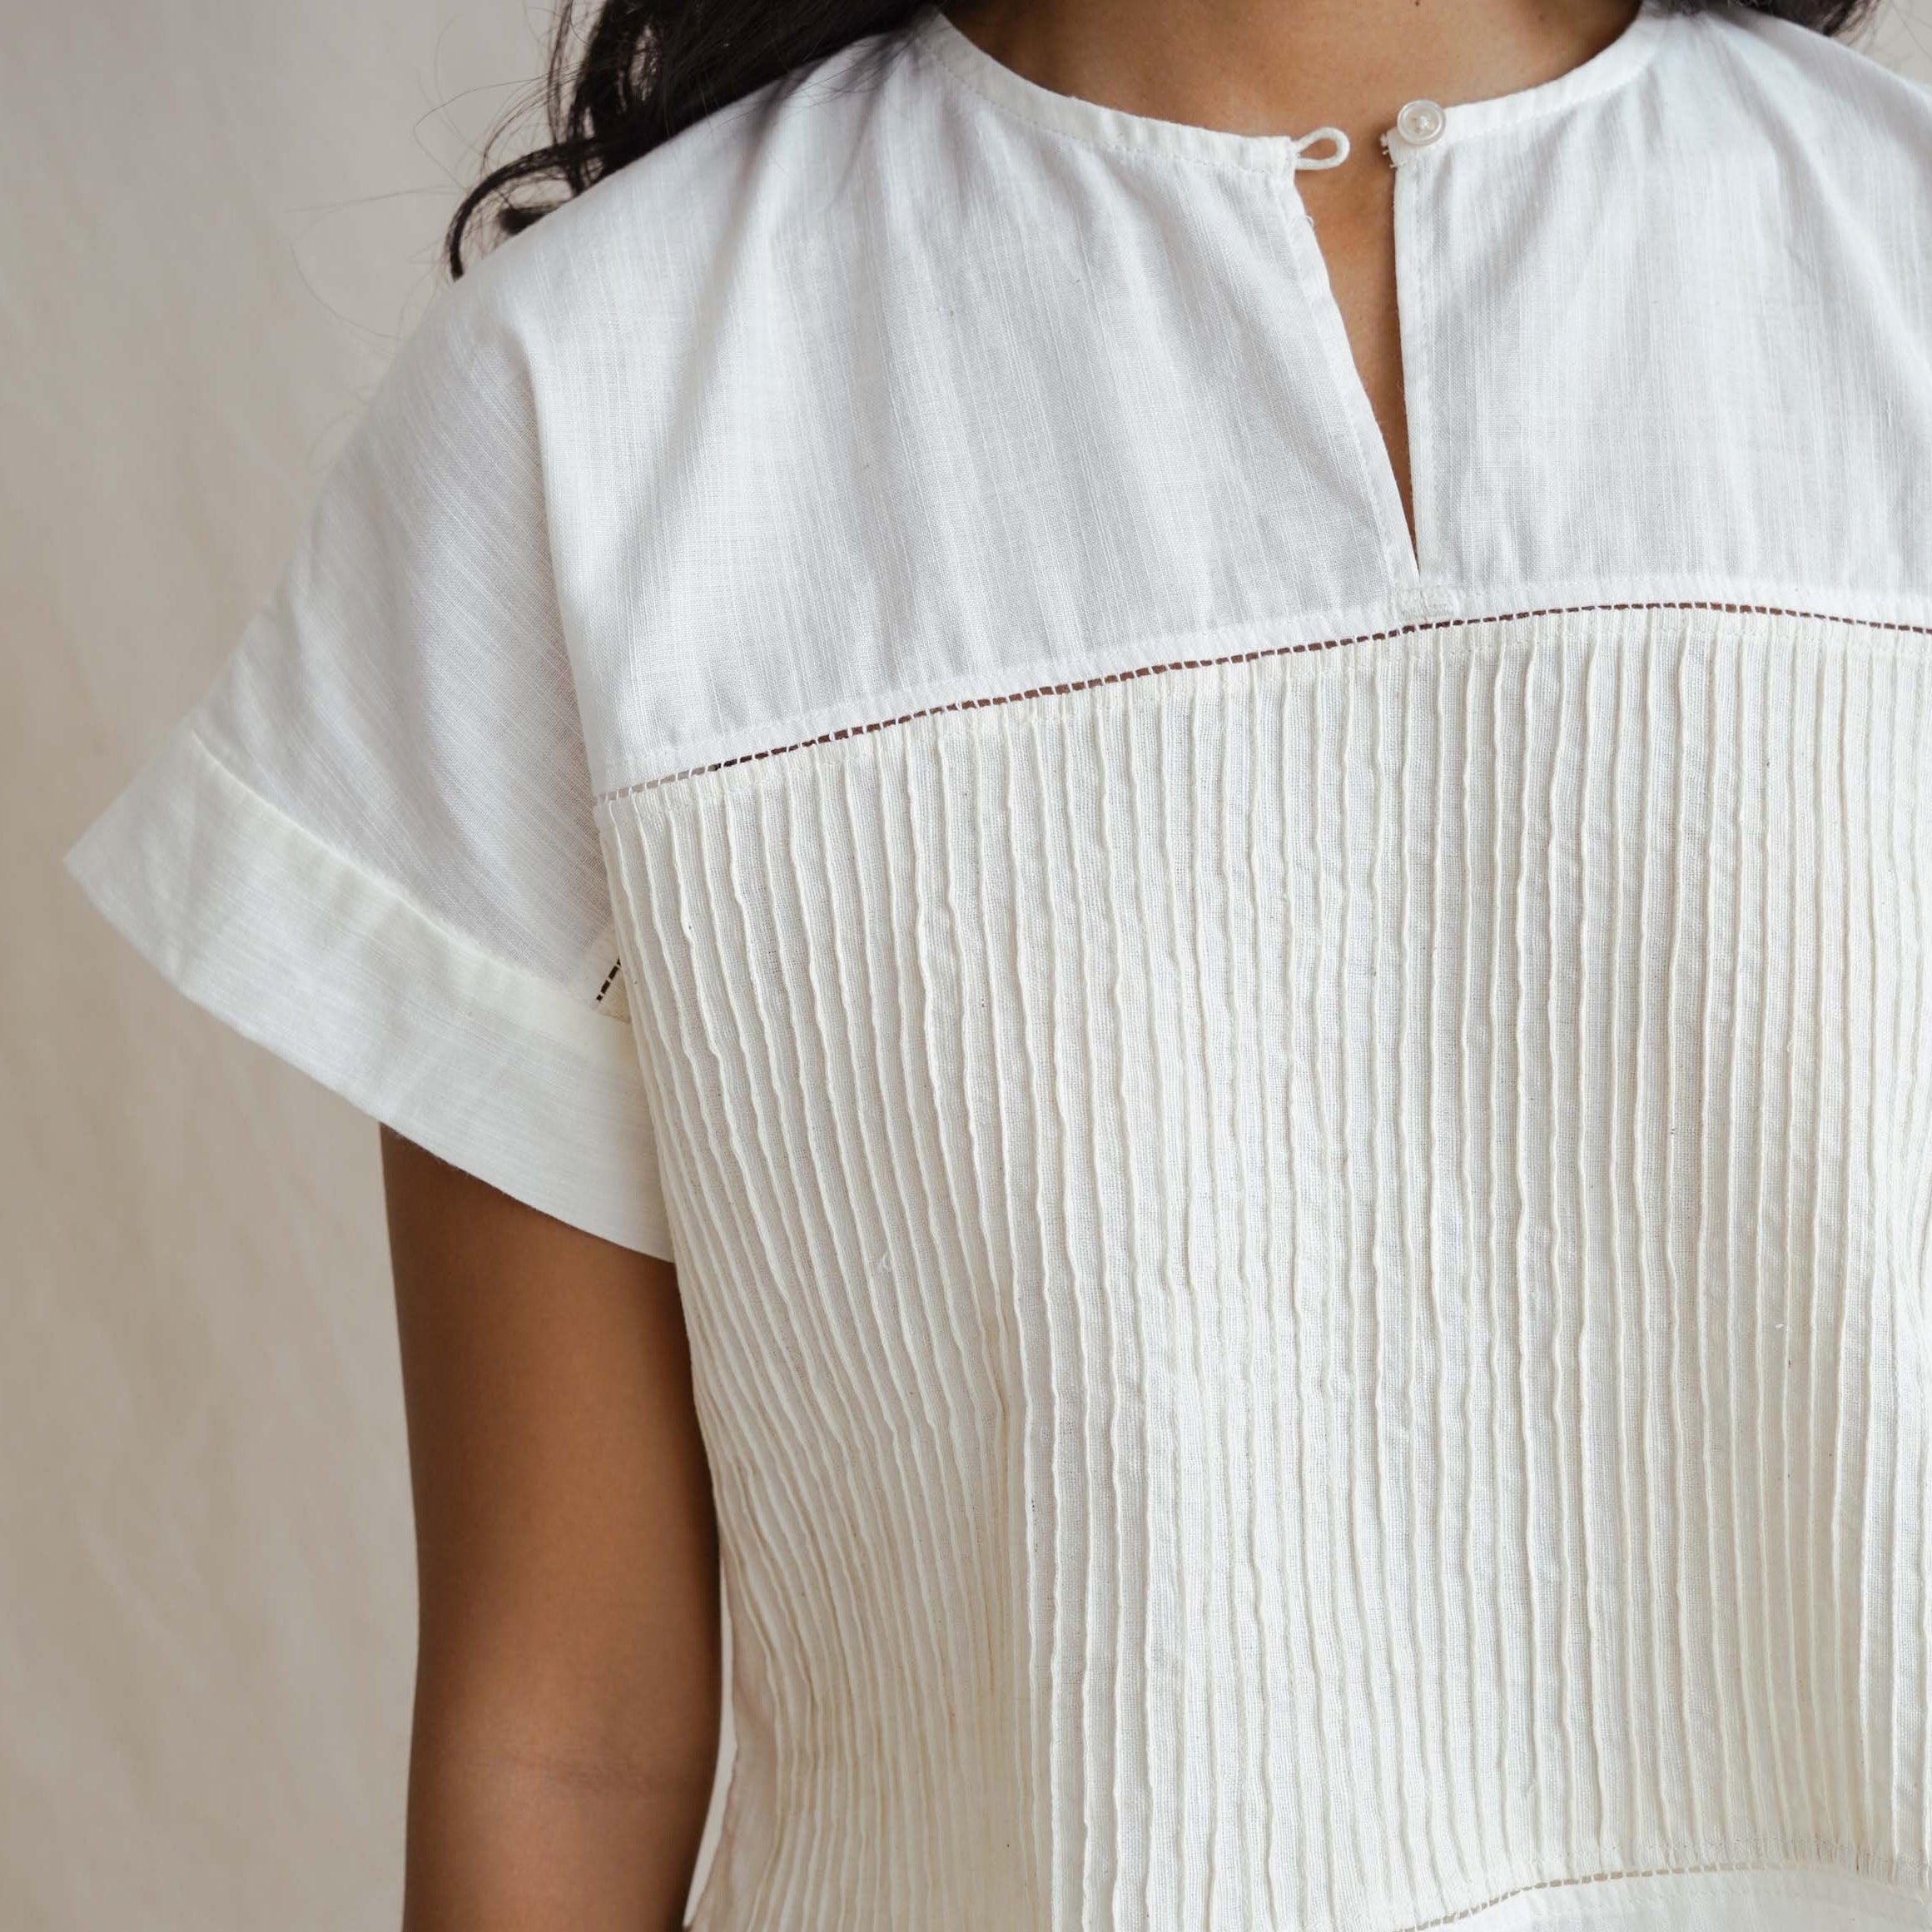 womenswear, heirloom cotton, women's top, top, blouse, slow fashion, handwoven cotton, handcrafted clothes